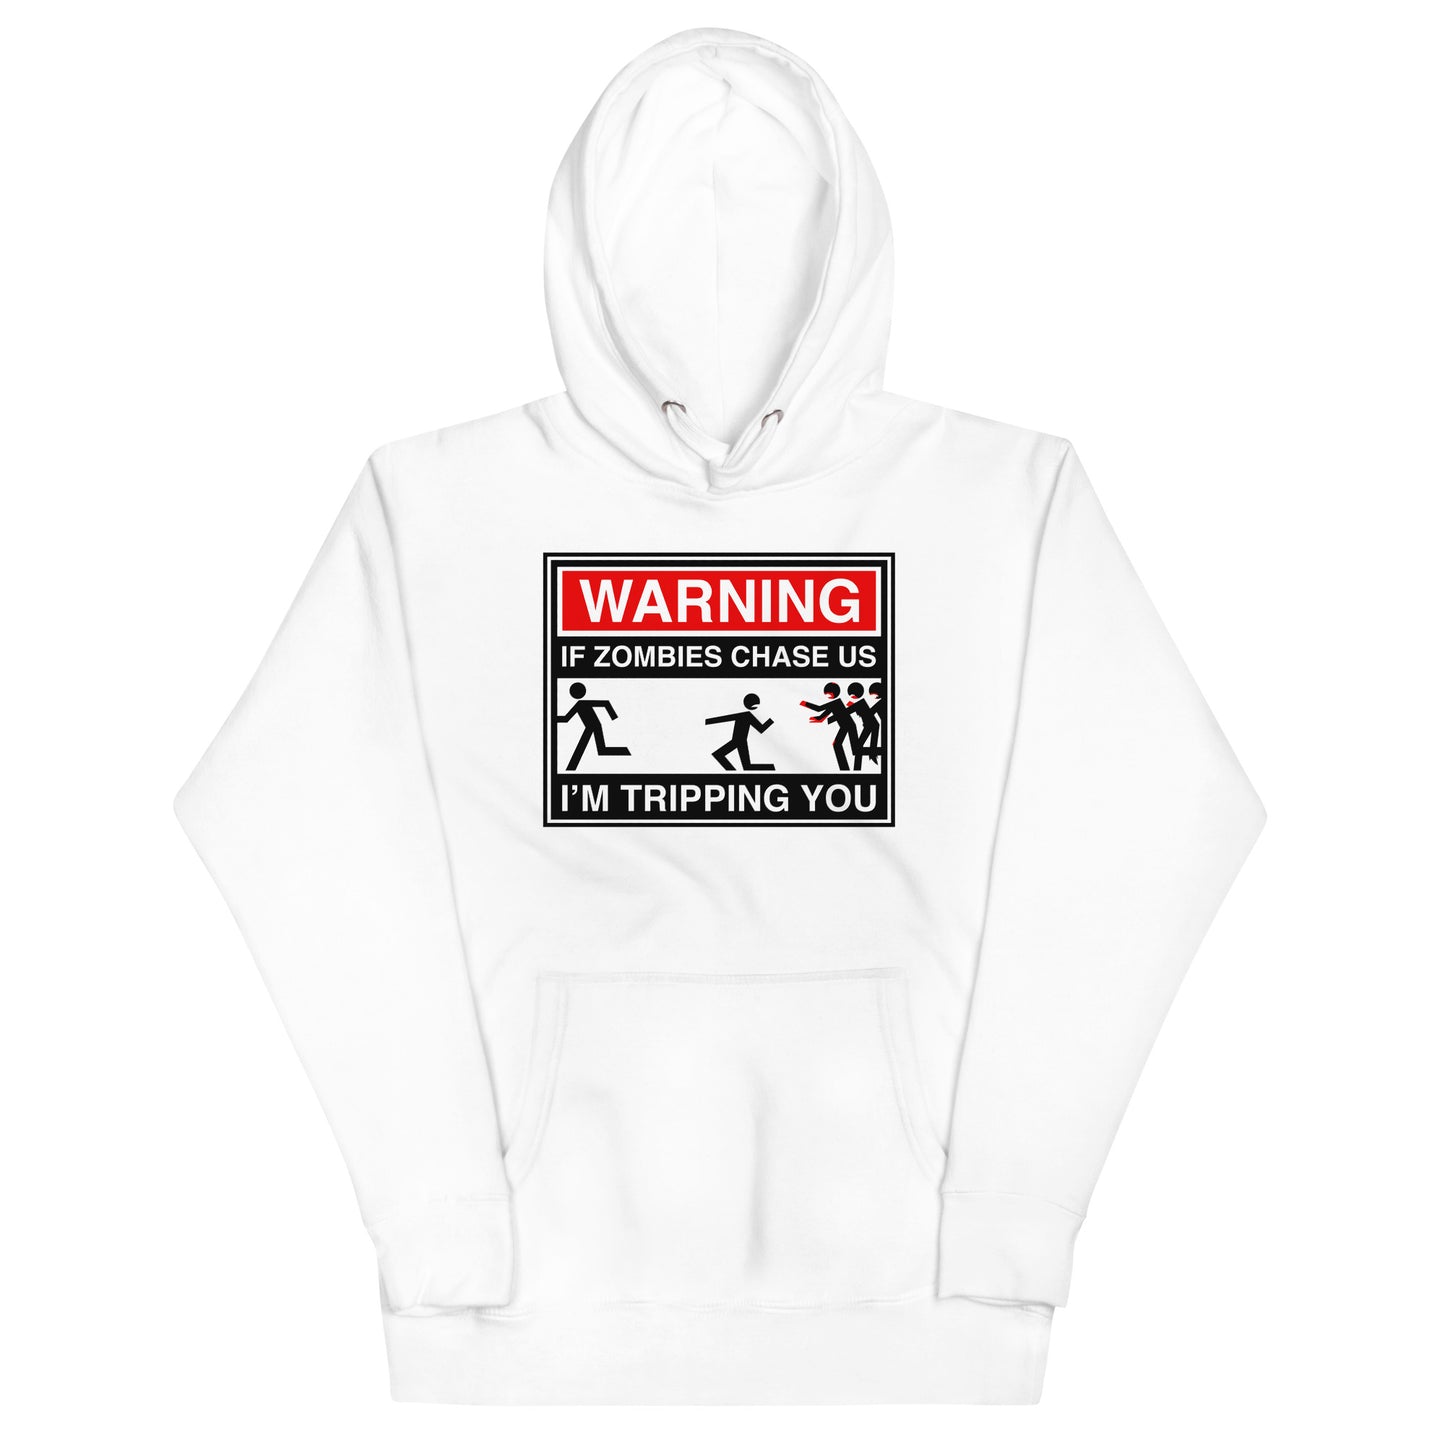 If Zombies Chase Us Unisex Hoodie